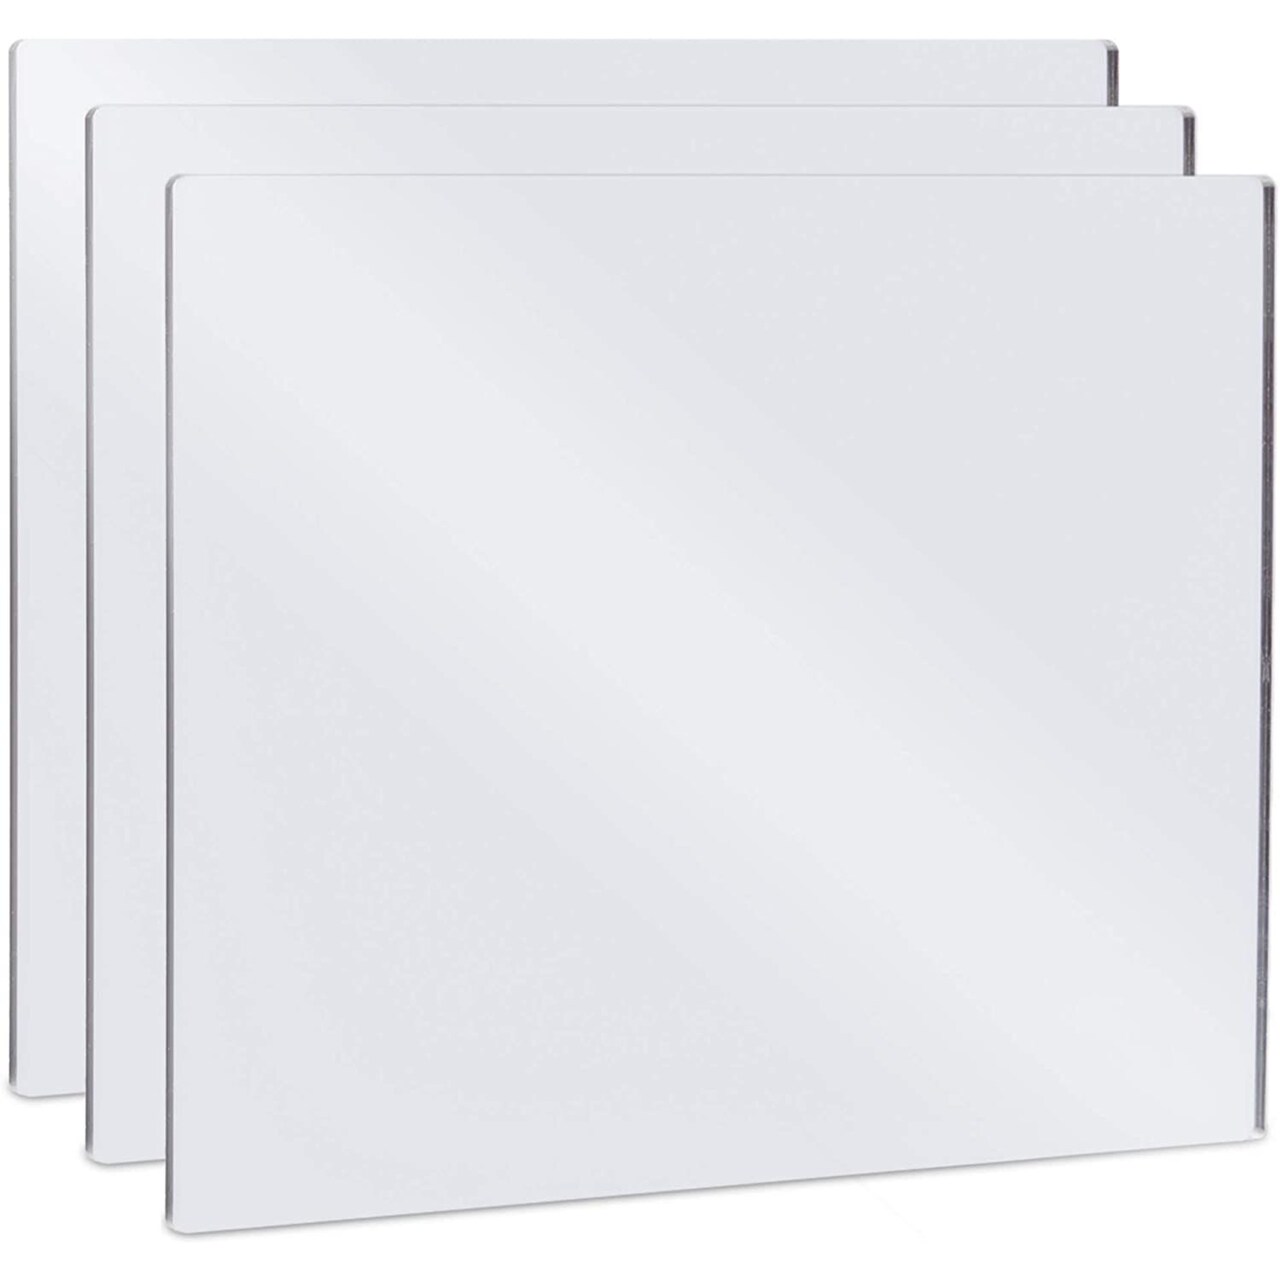 Acrylic Mirror Sheets, Shatter Resistant (3mm, 10 x 8 in, 3 Pack